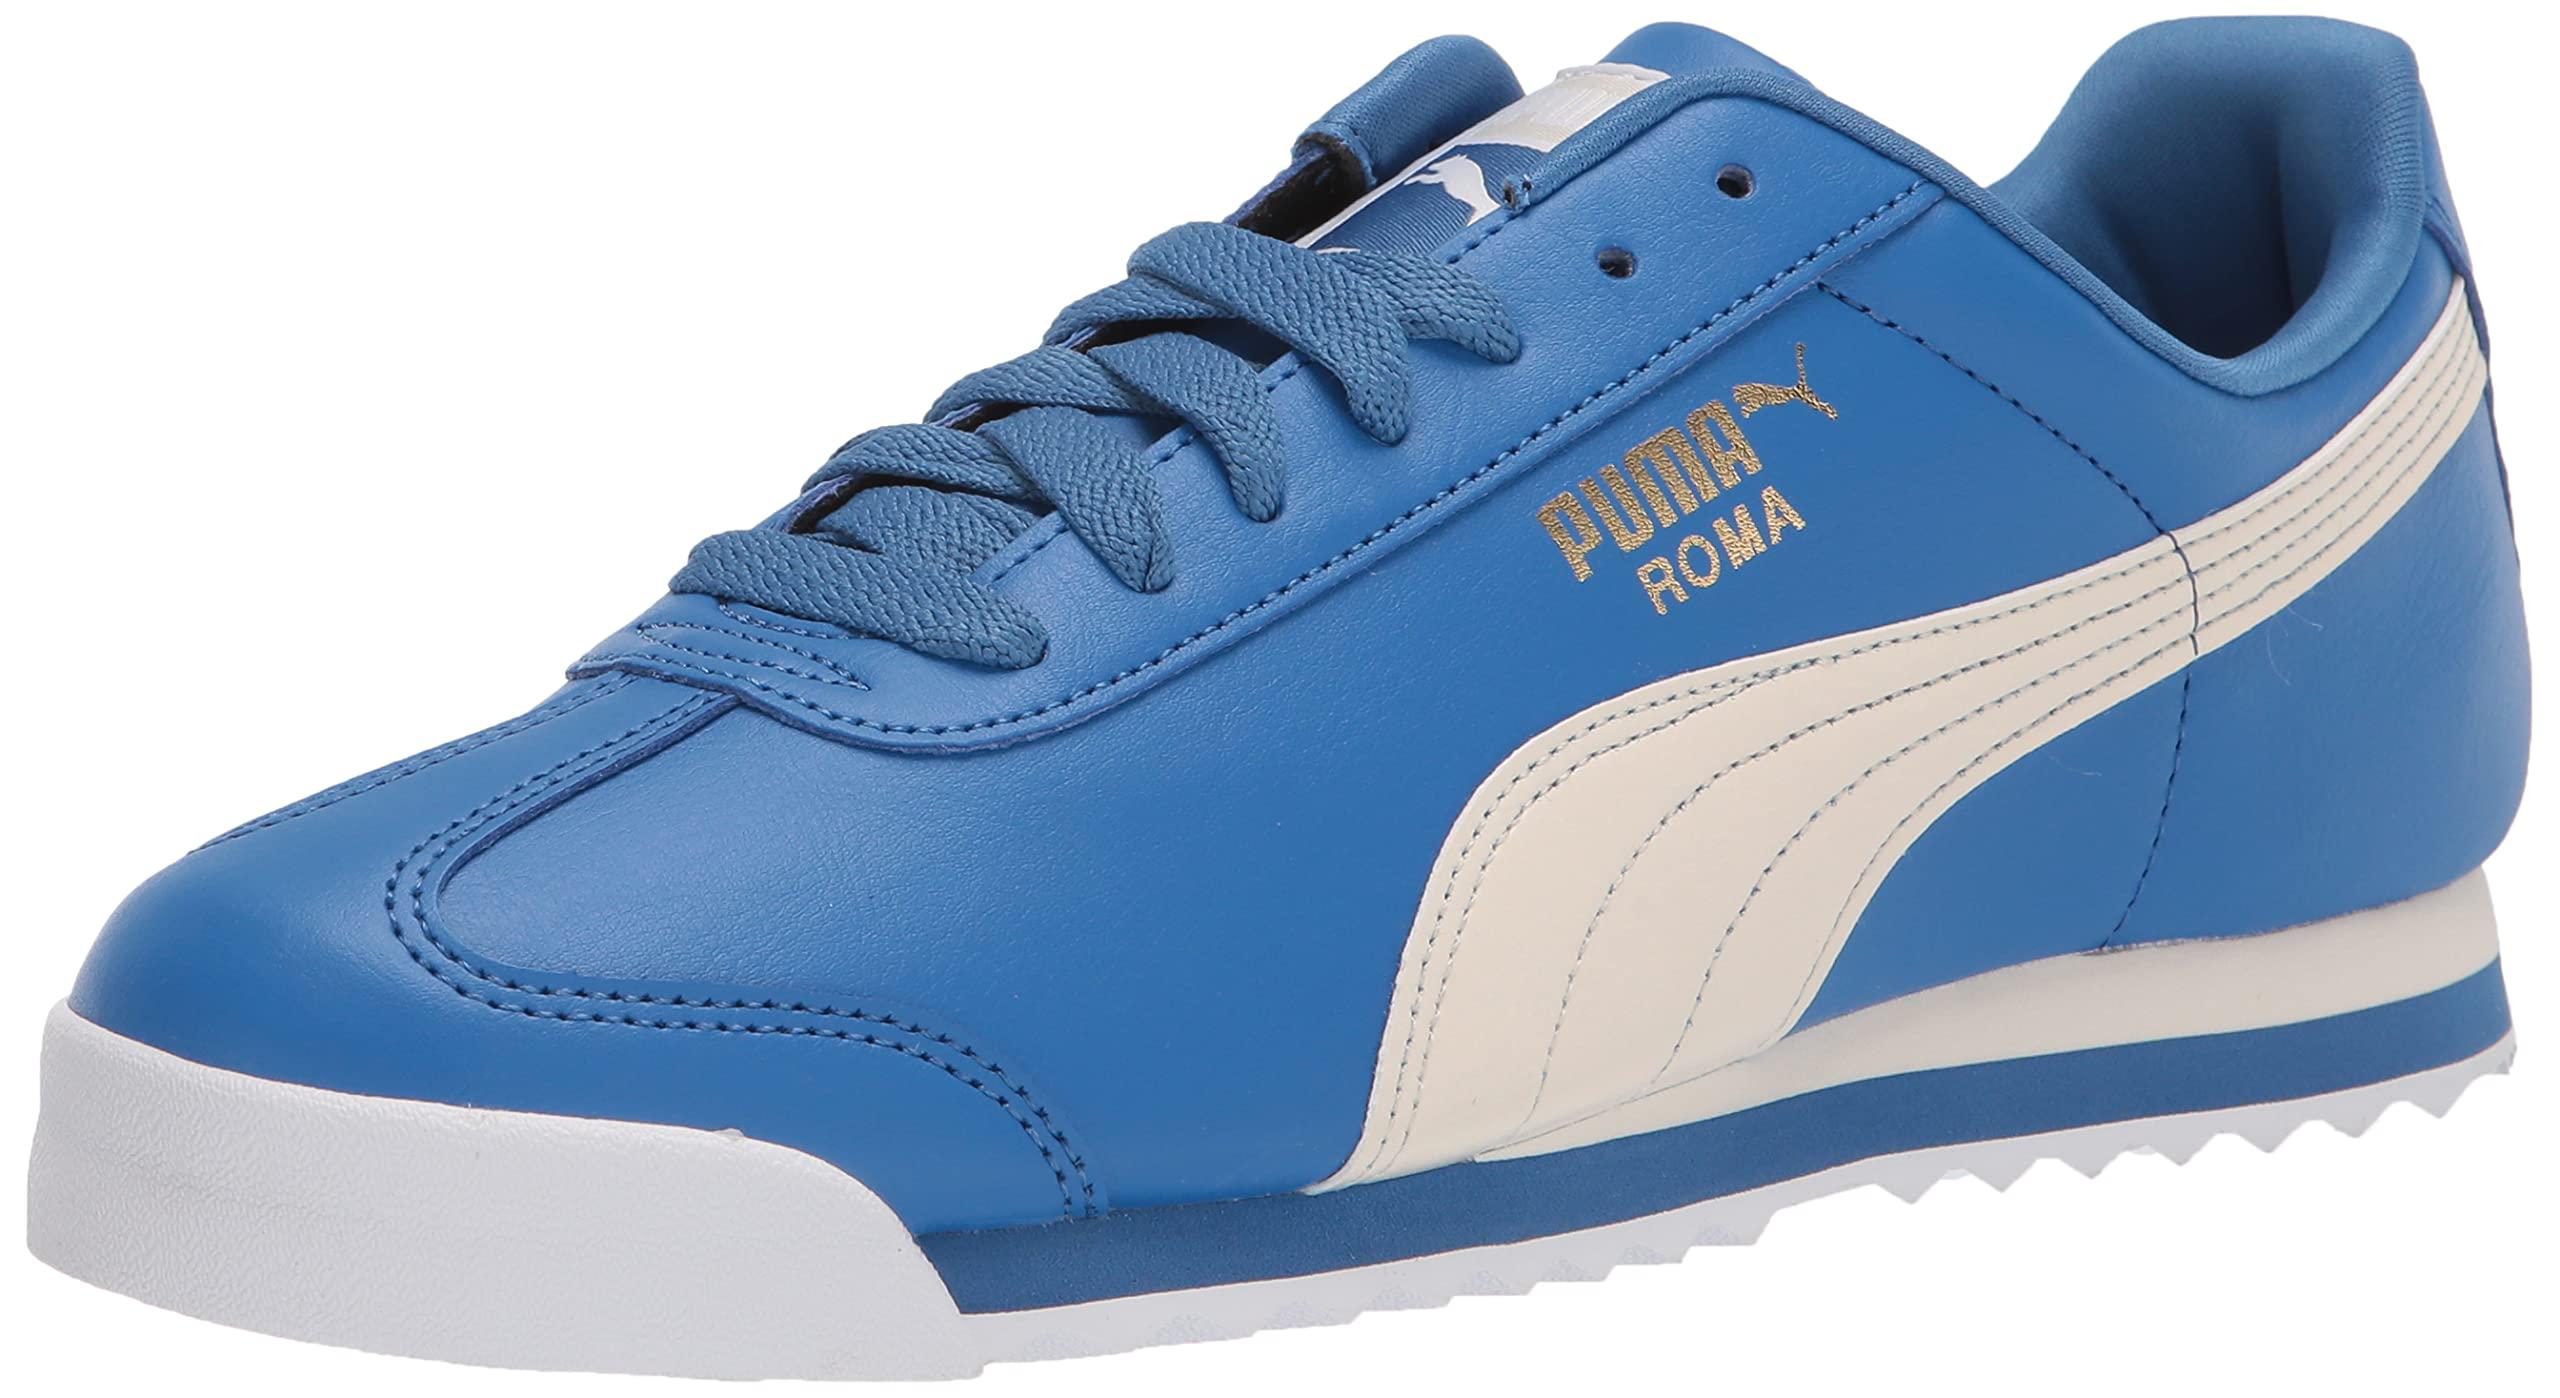 PUMA Men's Trackracer IDP Running Shoes (Size - 6, Blue, Orange) in Ranchi  at best price by Sports Station - Justdial